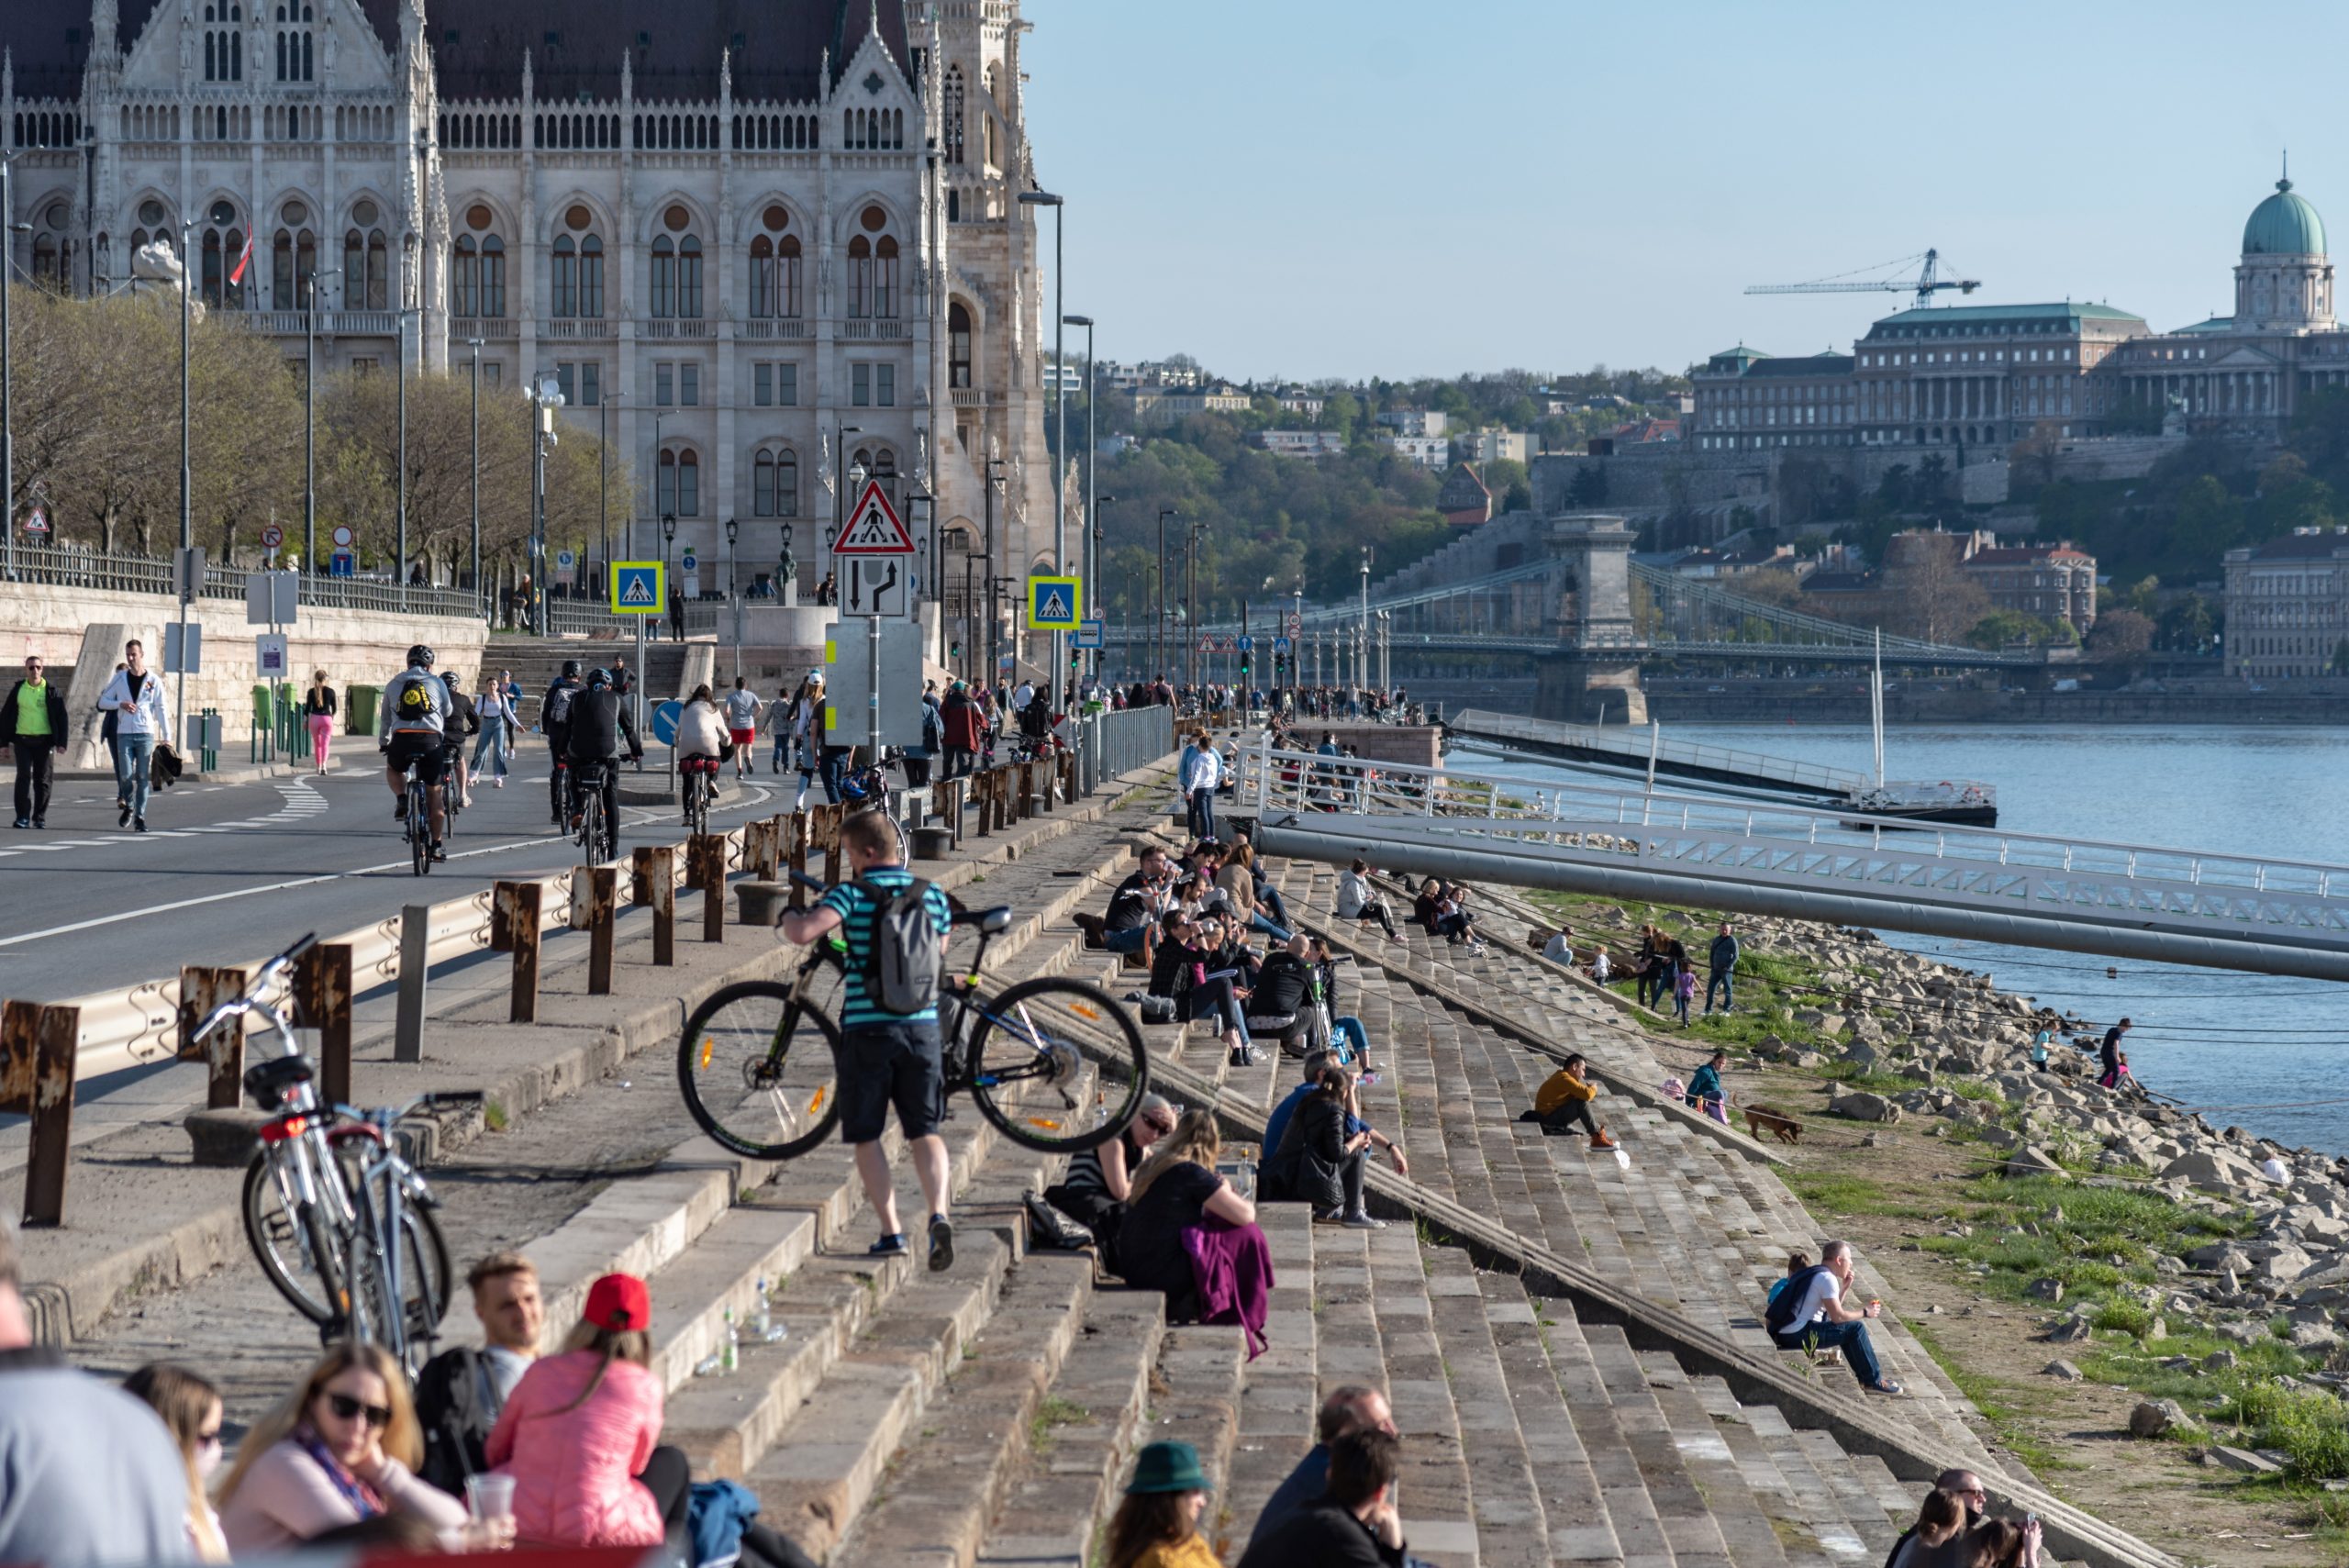 Pest Danube Embankment to Turn into Recreational Space